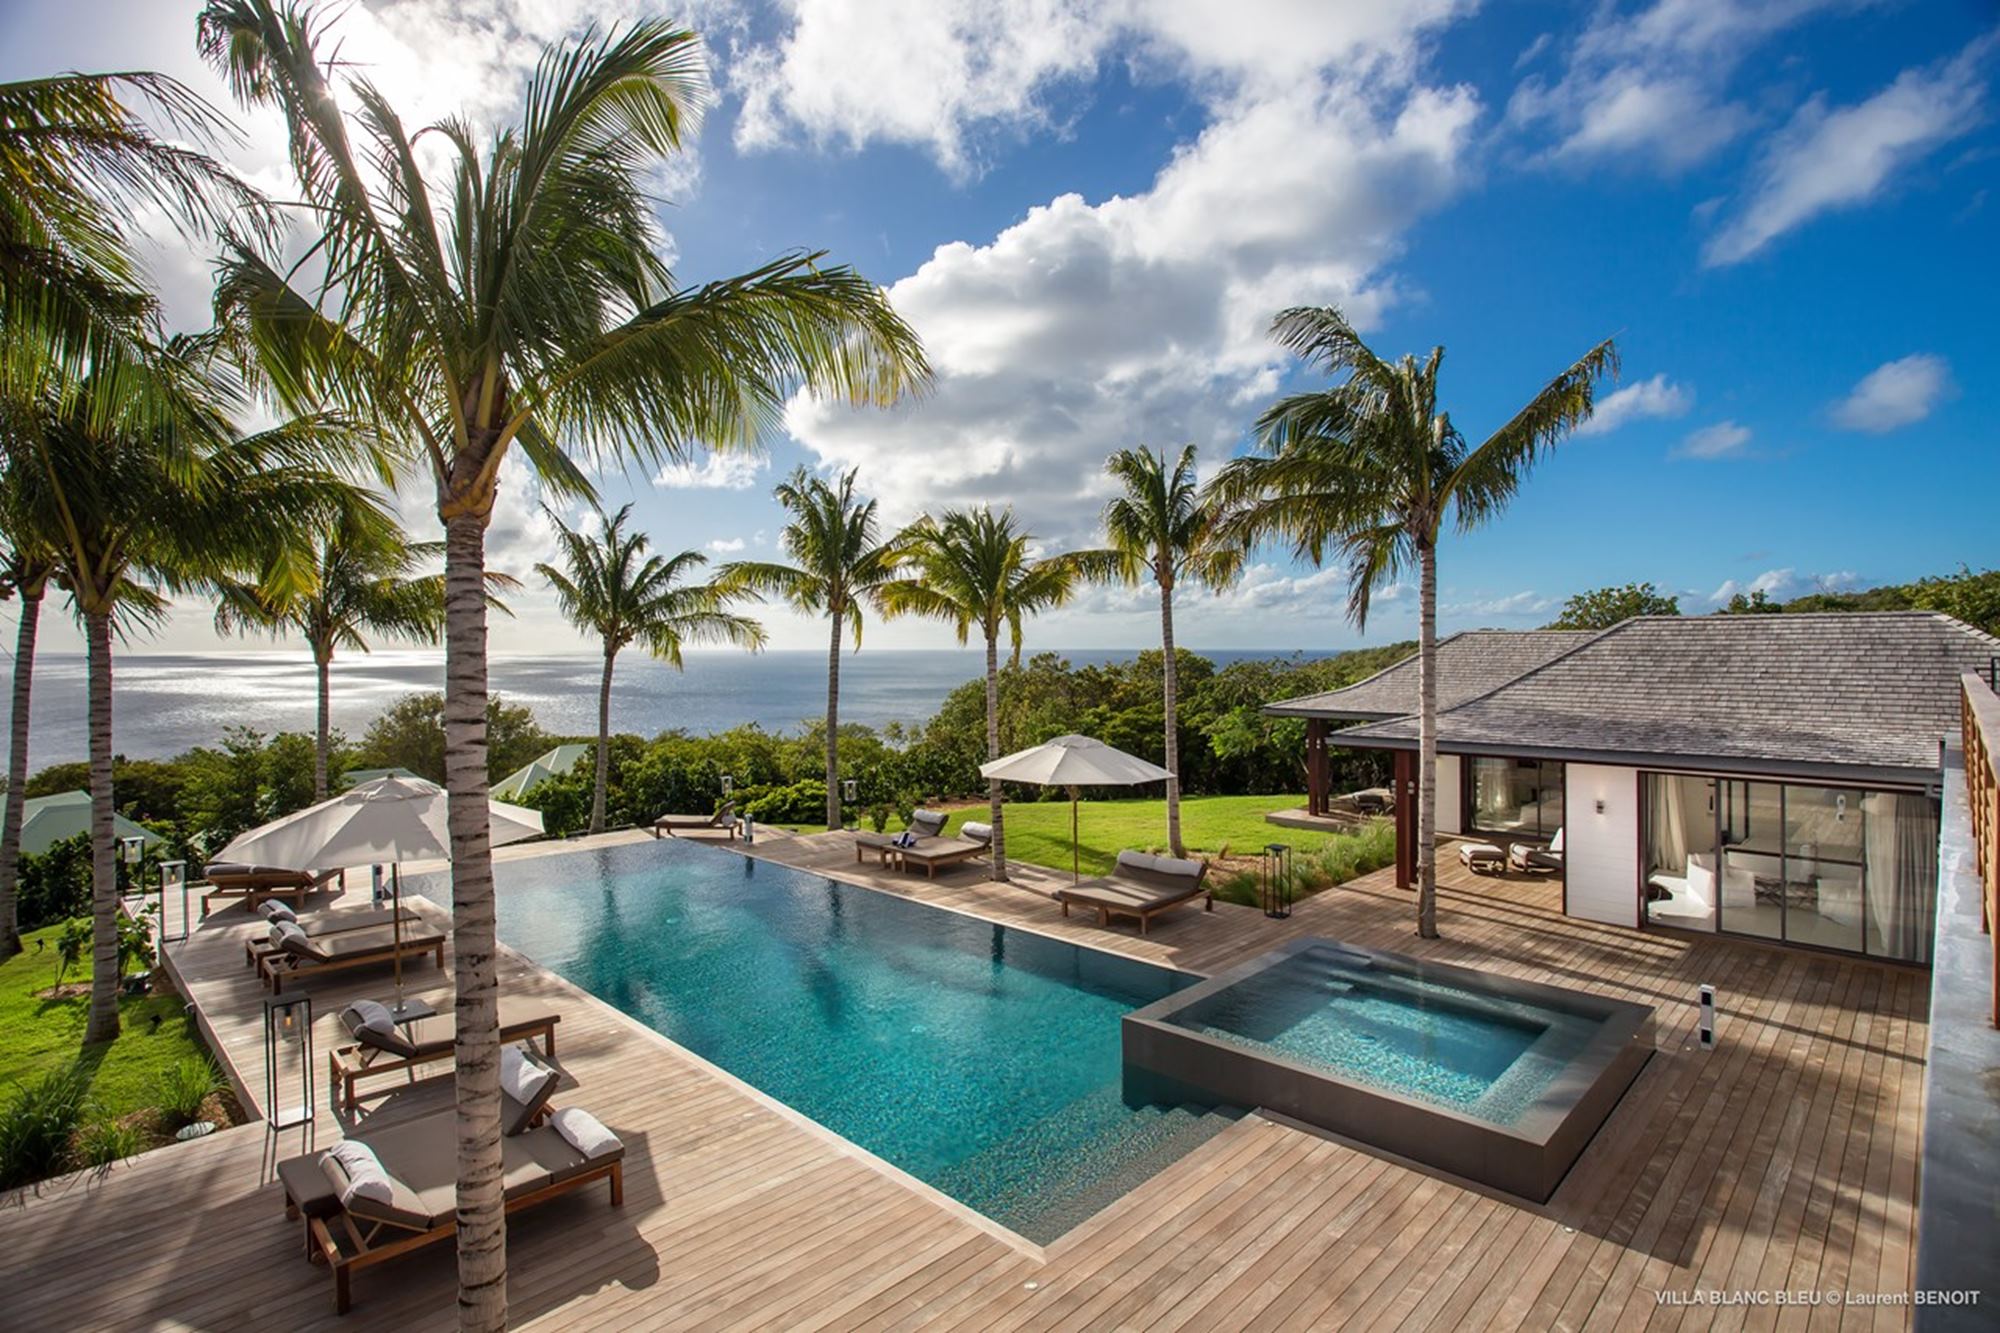 Nocturne Luxury Villas, Backed by Gladstone Investment Corporation, Announces Third in a Series of Investments in the Luxury Vacation Rental Sector with the Acquisition of West Indies Management Company (WIMCO Villas)